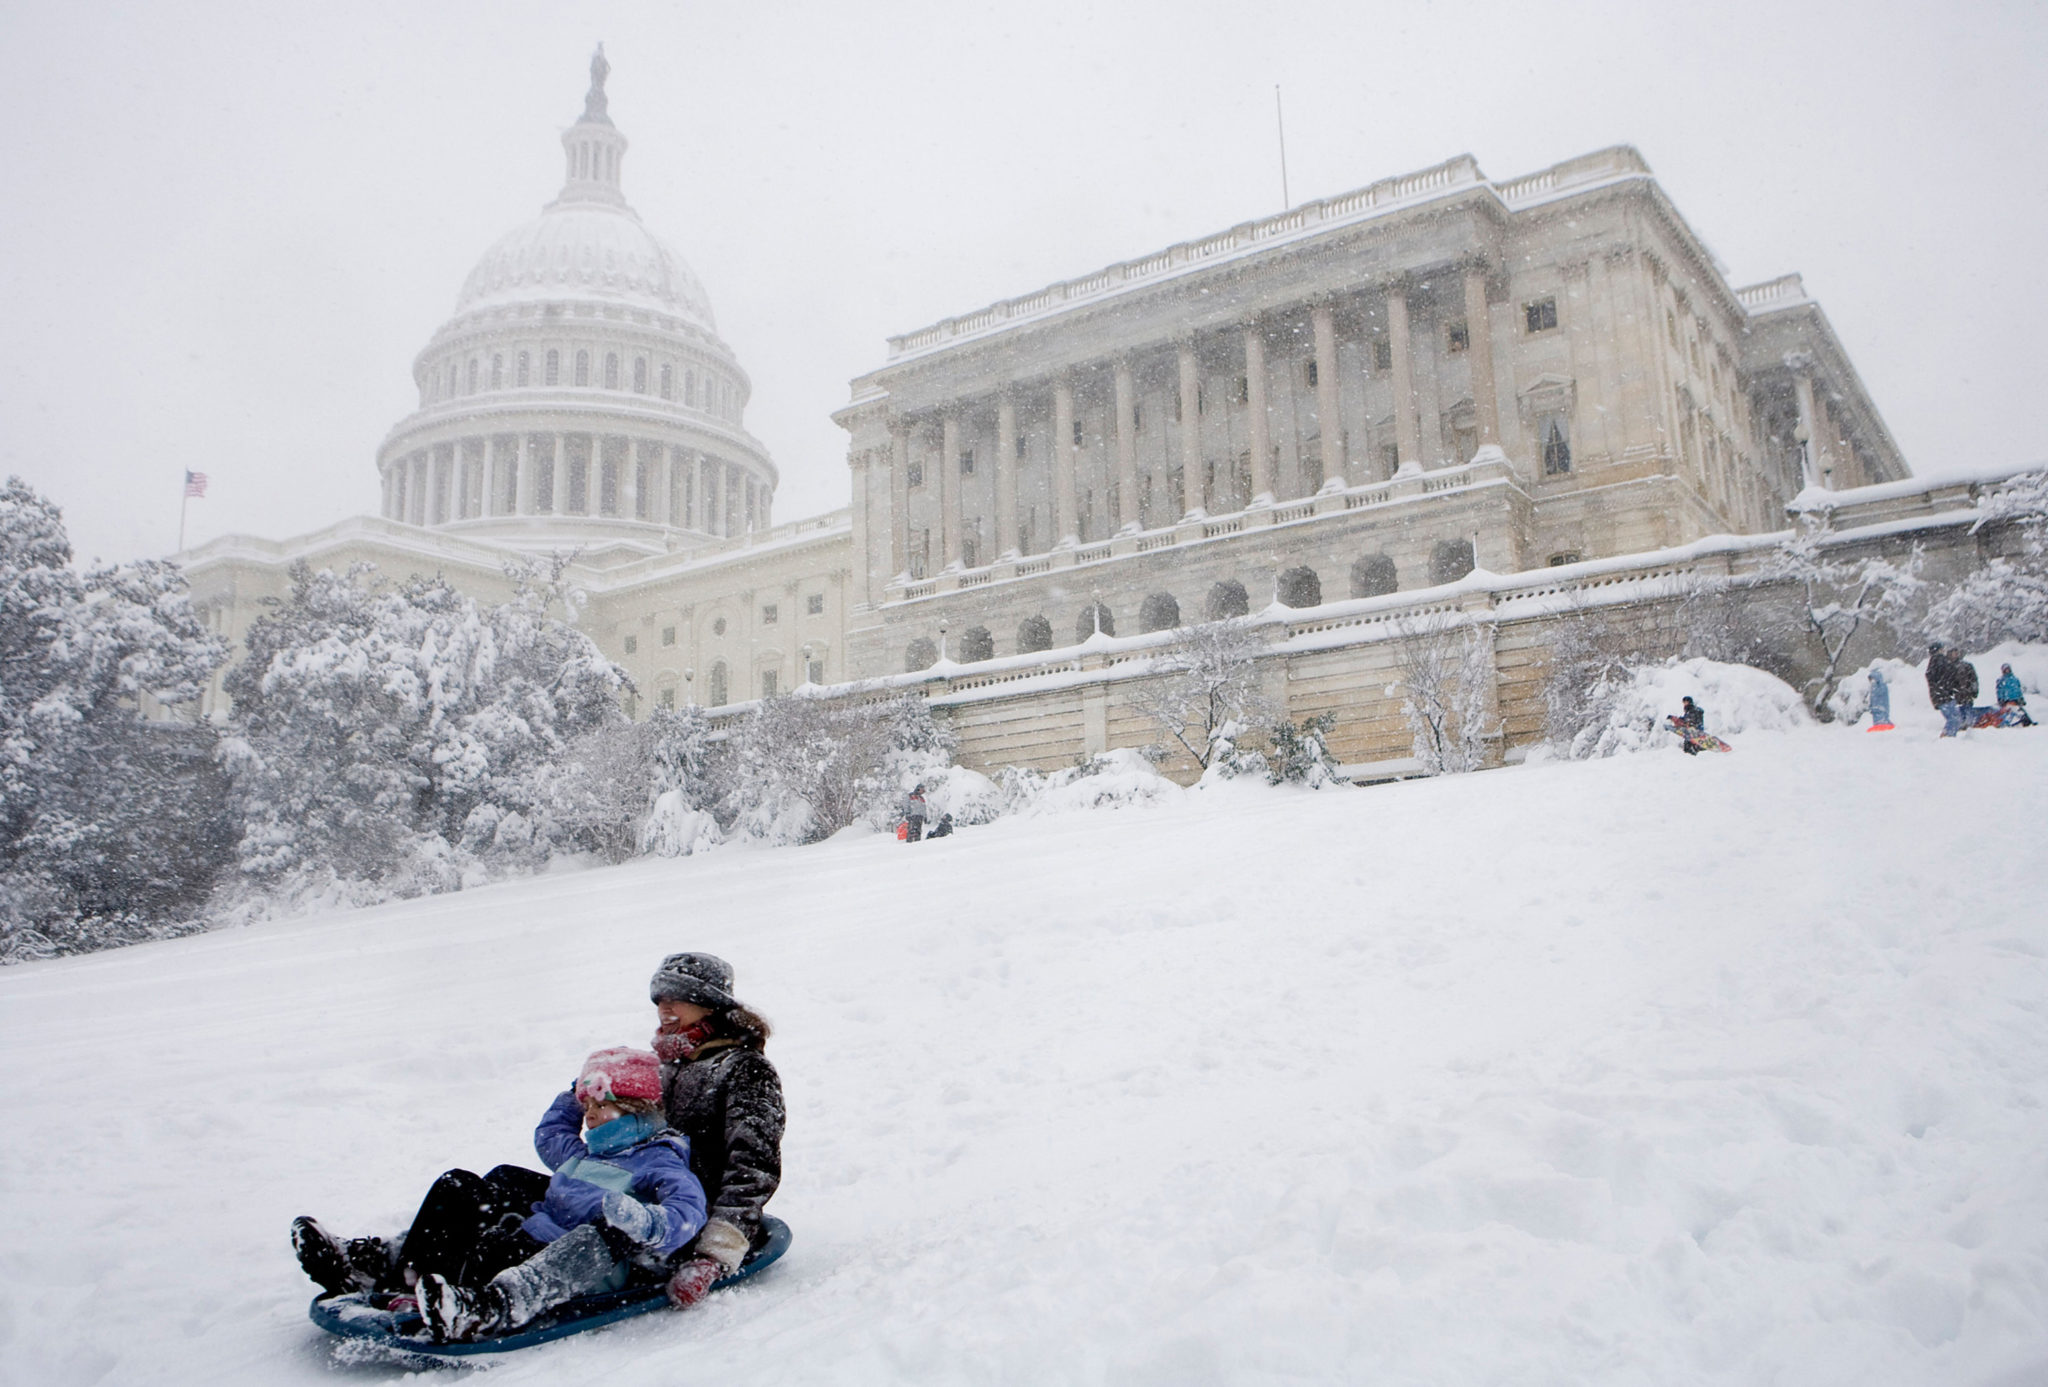 How to Dress Warm for Winters in DC